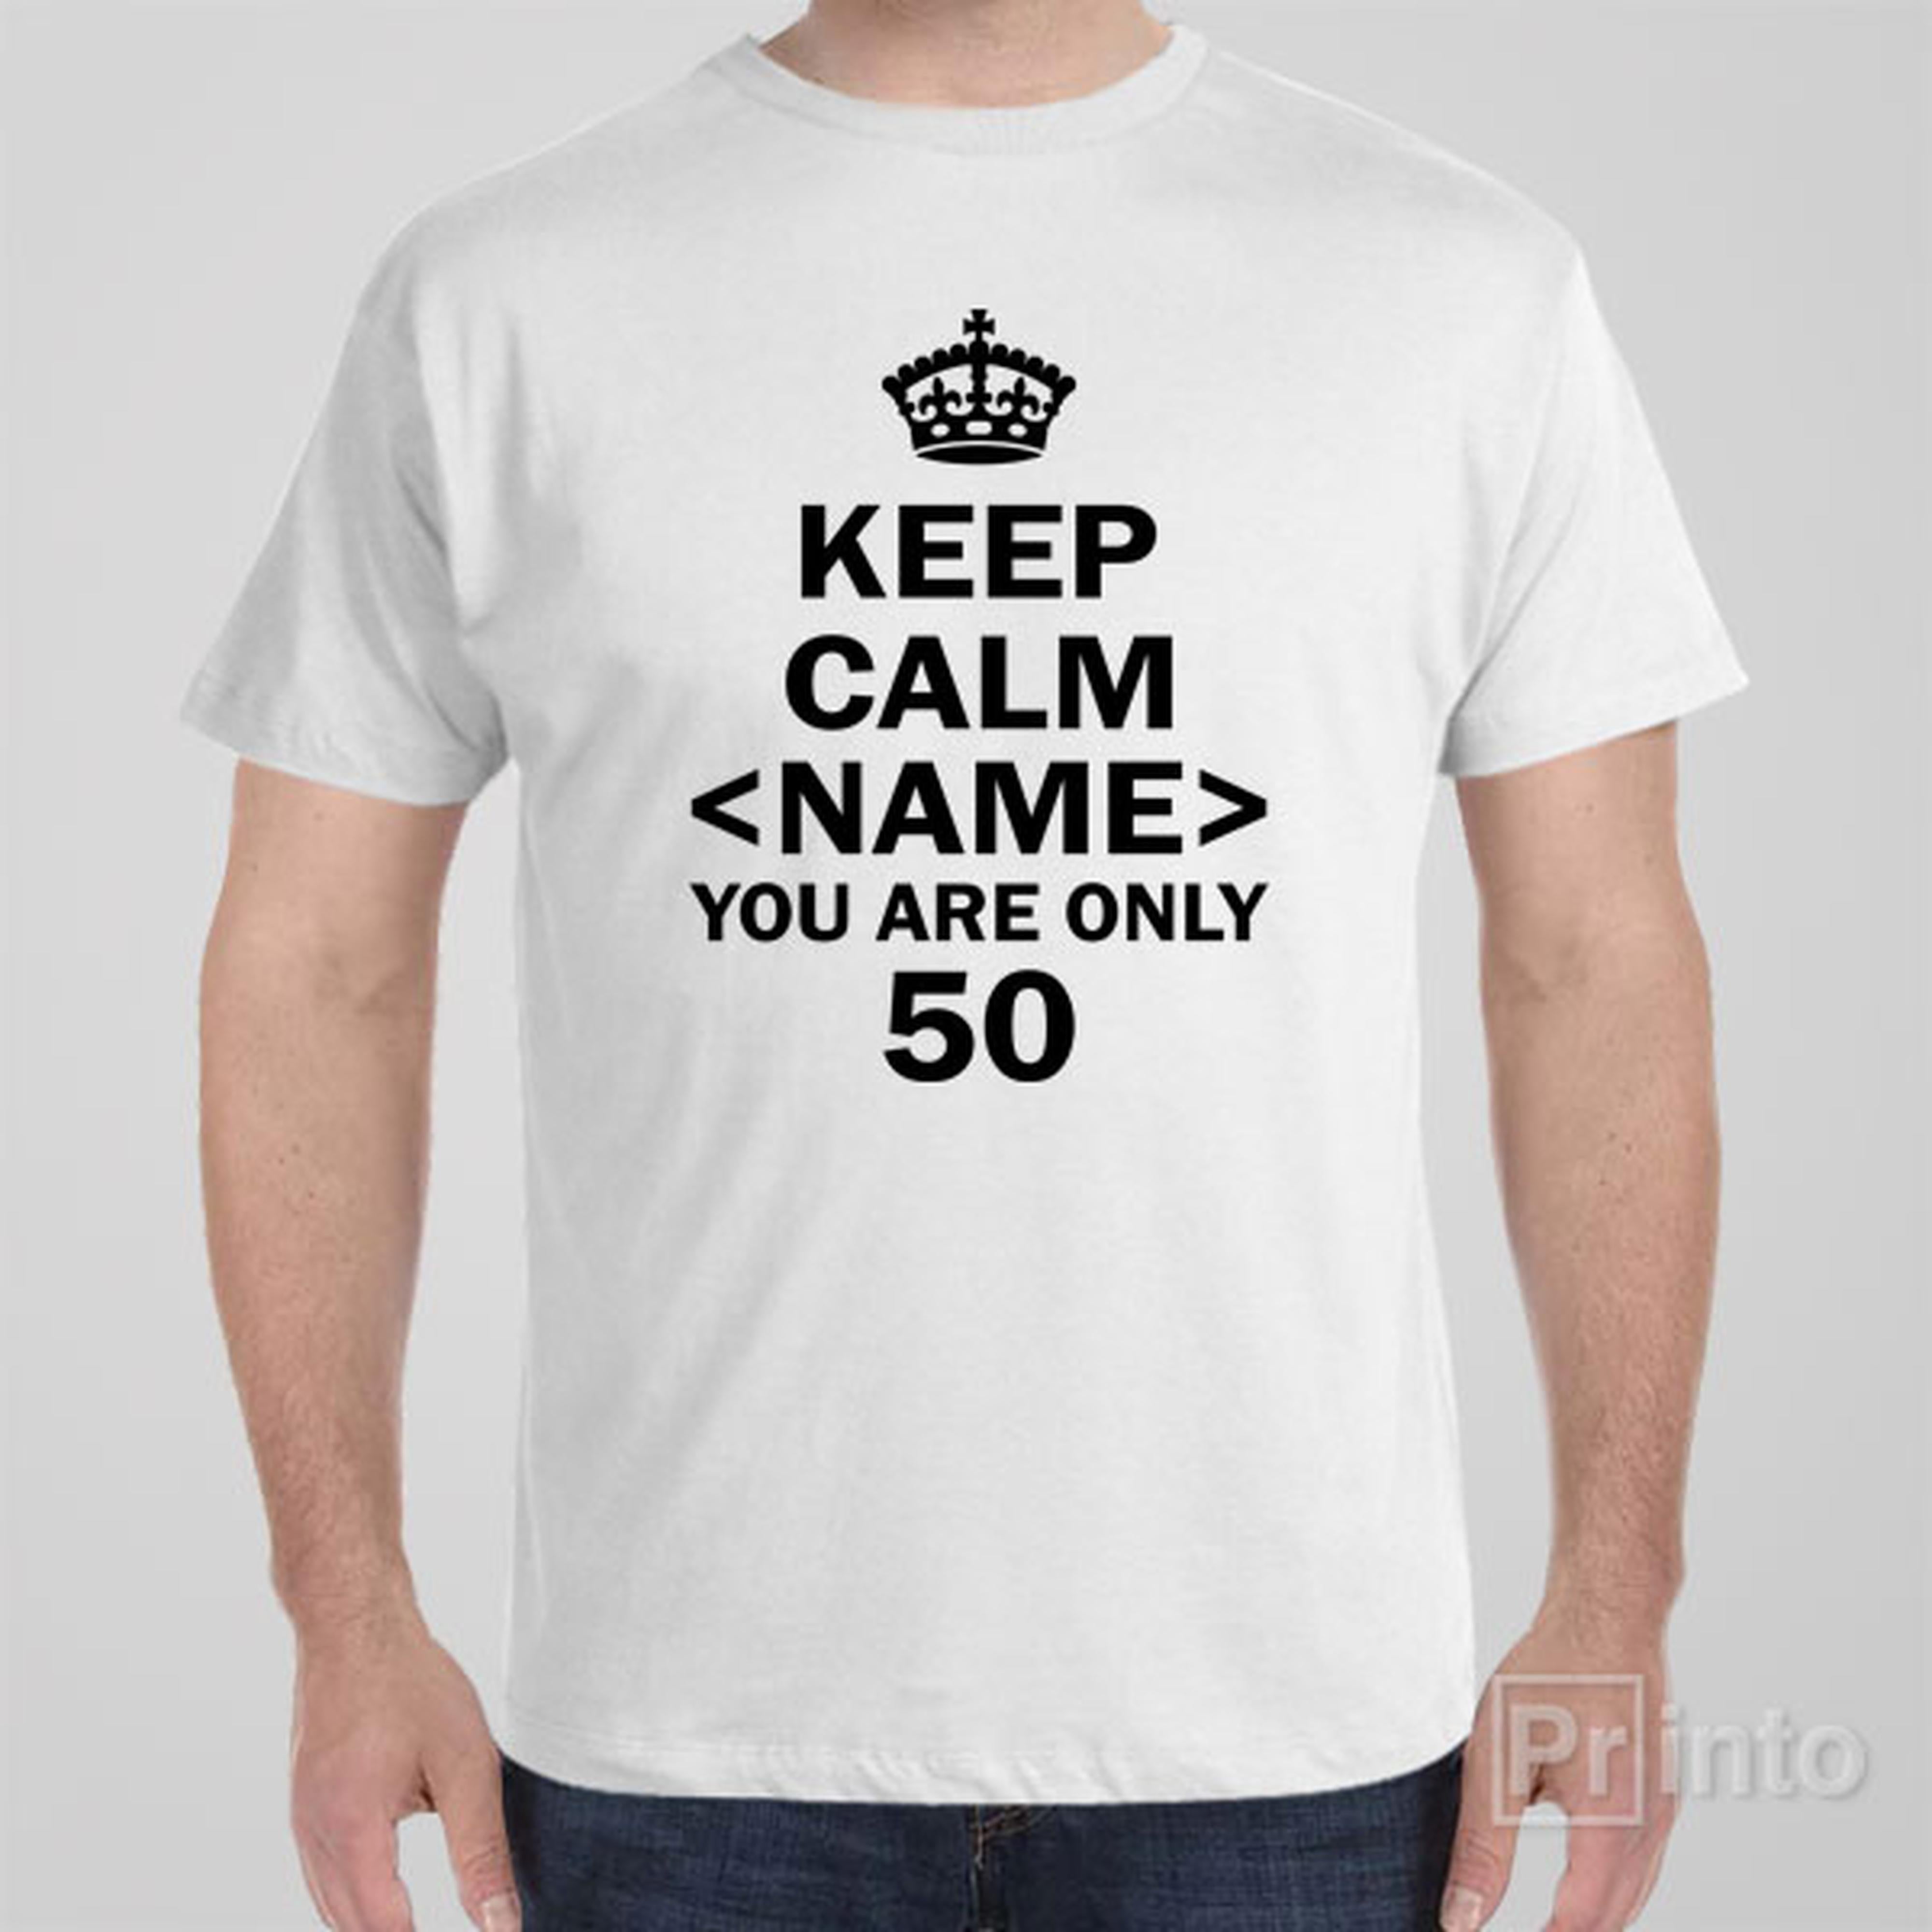 keep-calm-you-are-only-50-t-shirt